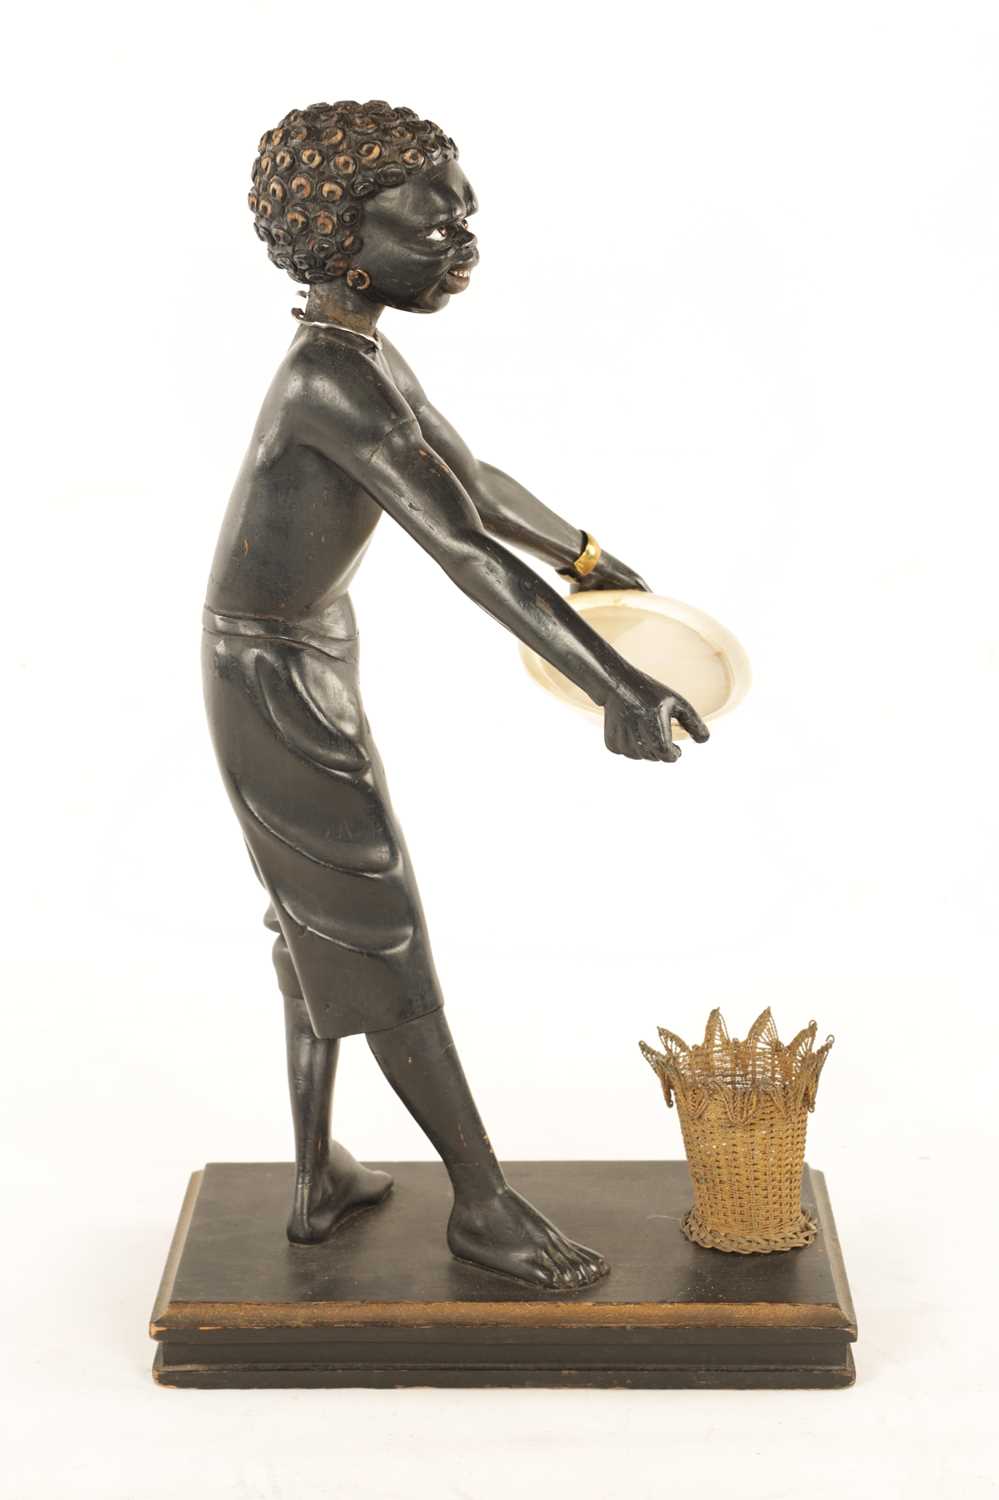 A 19TH CENTURY CARVED WOOD AND IVORY BLACKAMOOR “CARD” FIGURE - Image 4 of 13